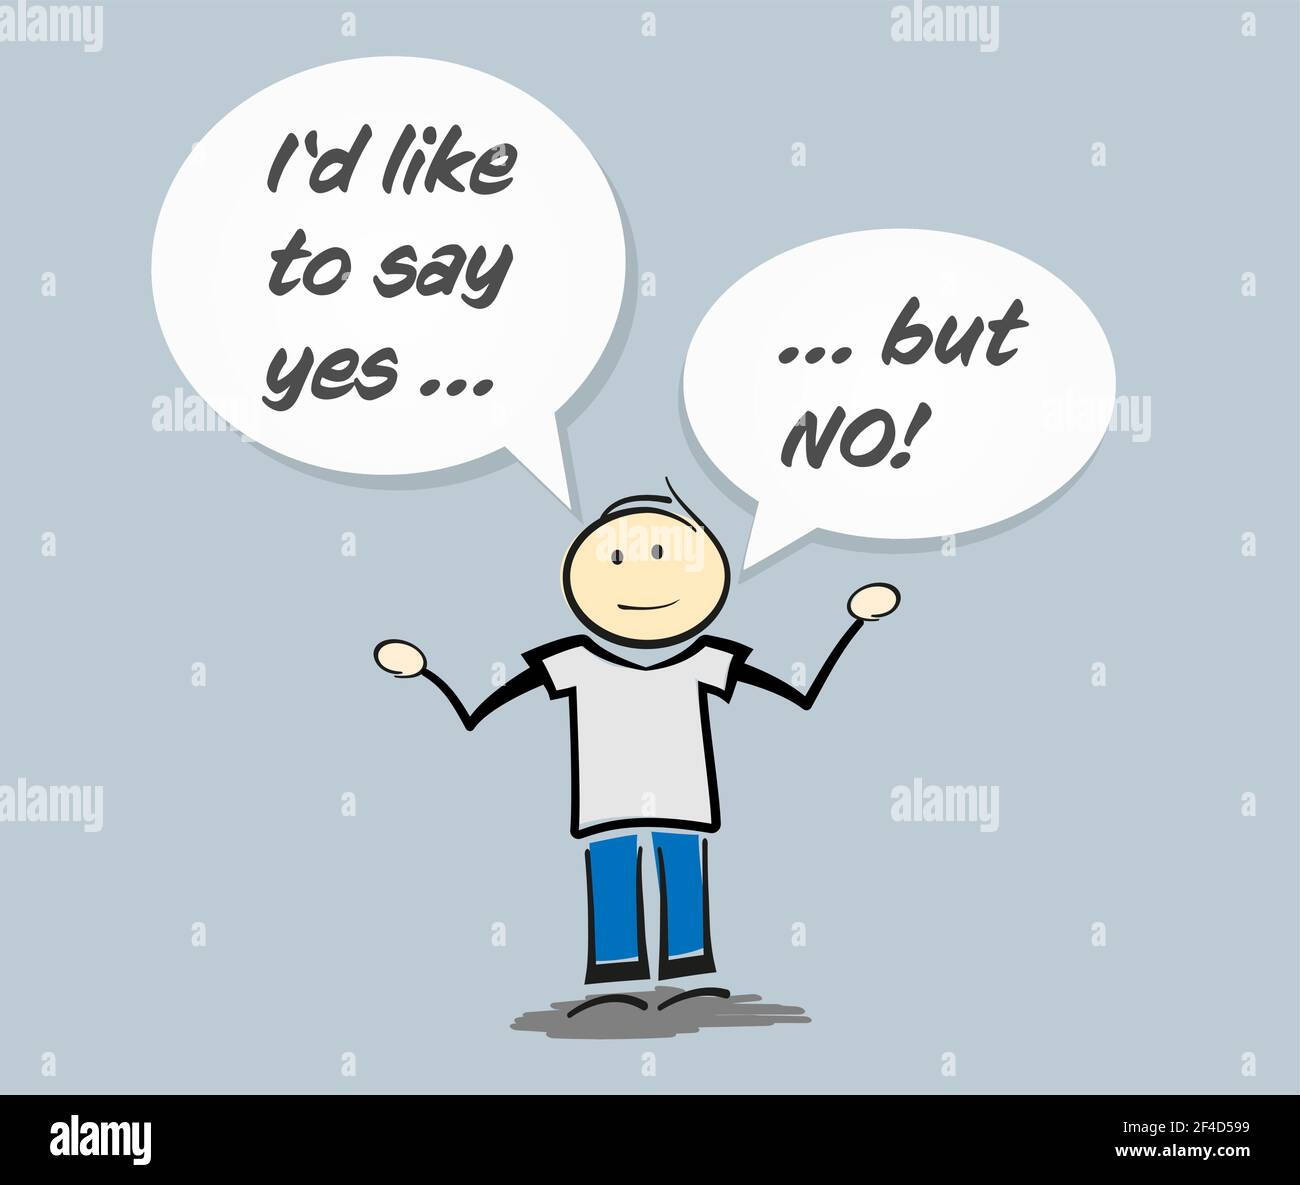 stickman character with text I WOULD LIKE TO SAY YES ... BUT NO in speech bubbles vector illustration Stock Vector